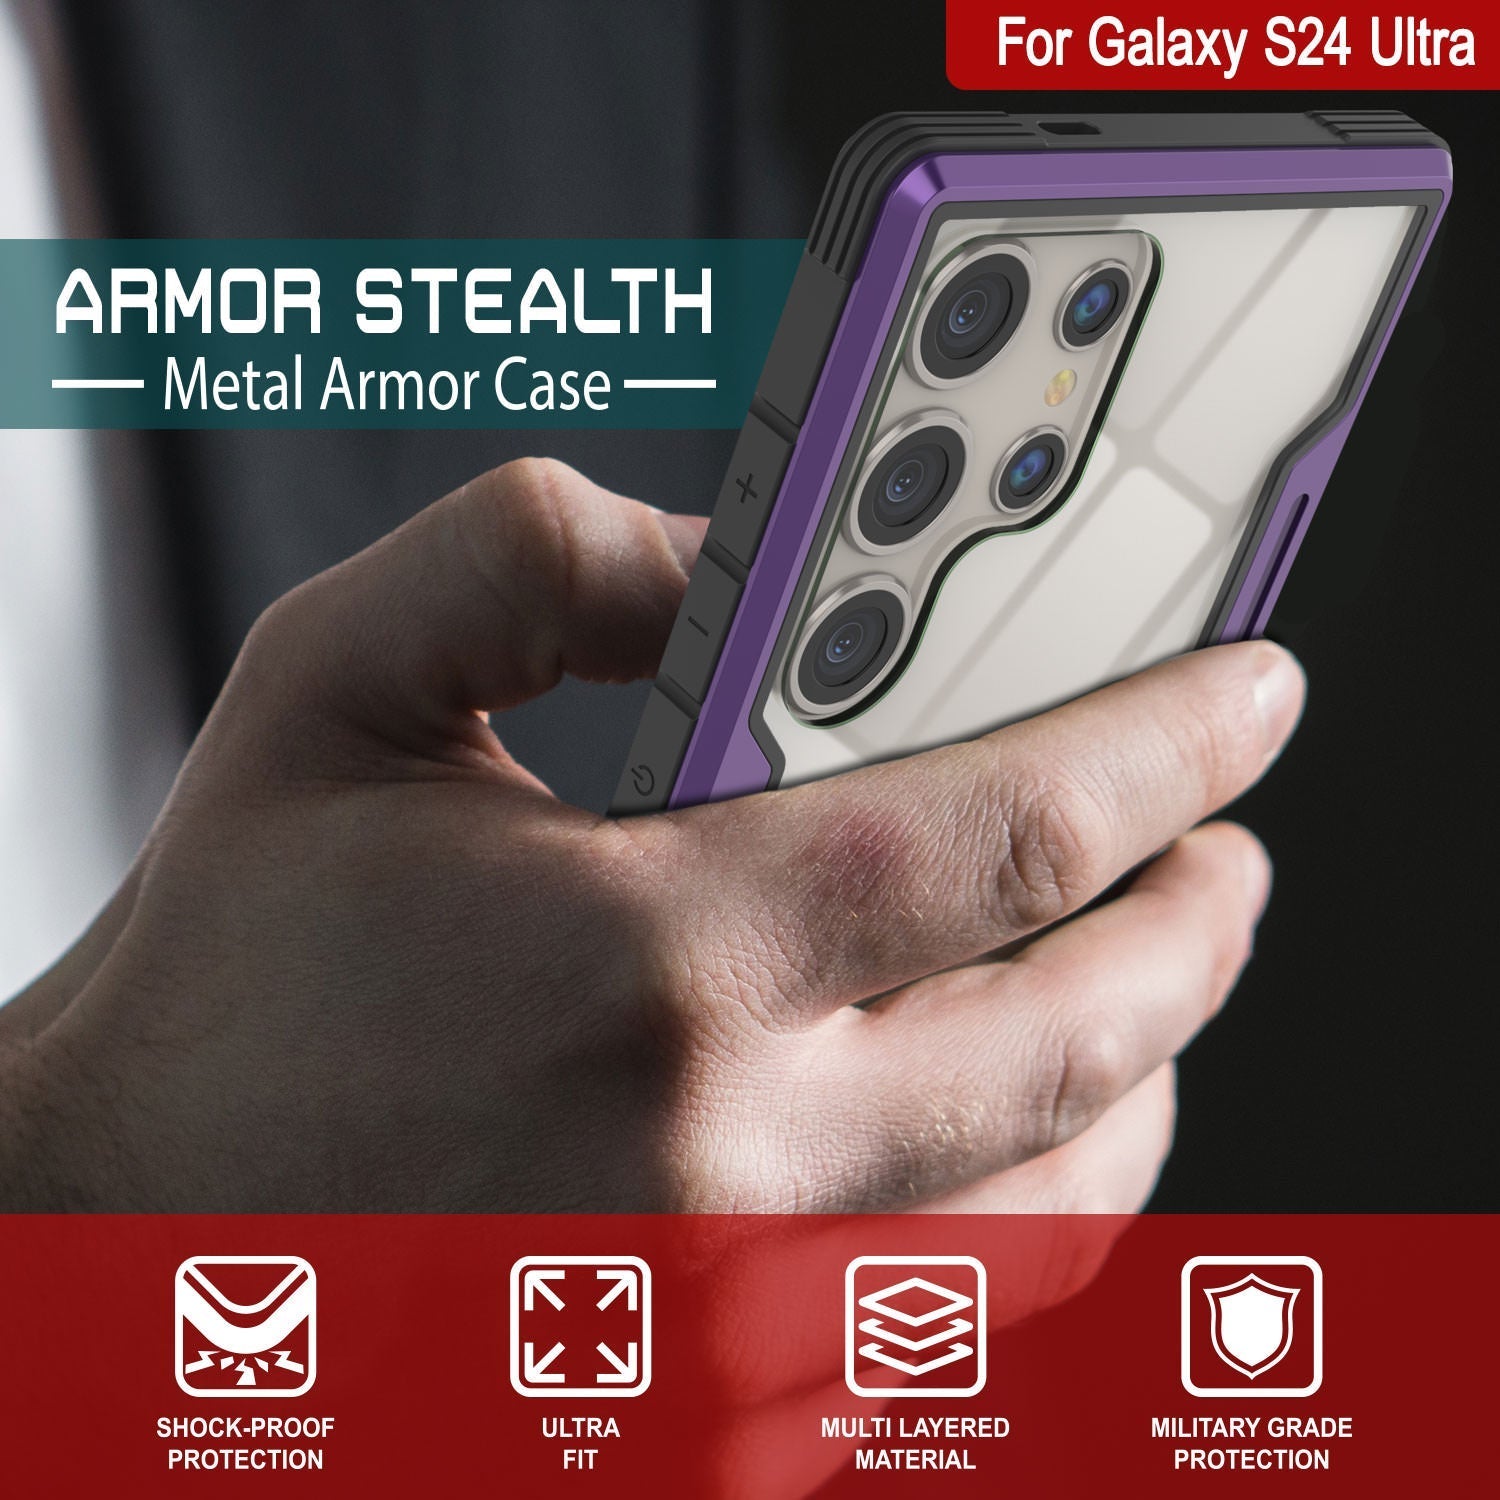 Punkcase S24 Ultra Armor Stealth Case Protective Military Grade Multilayer Cover [Purple]